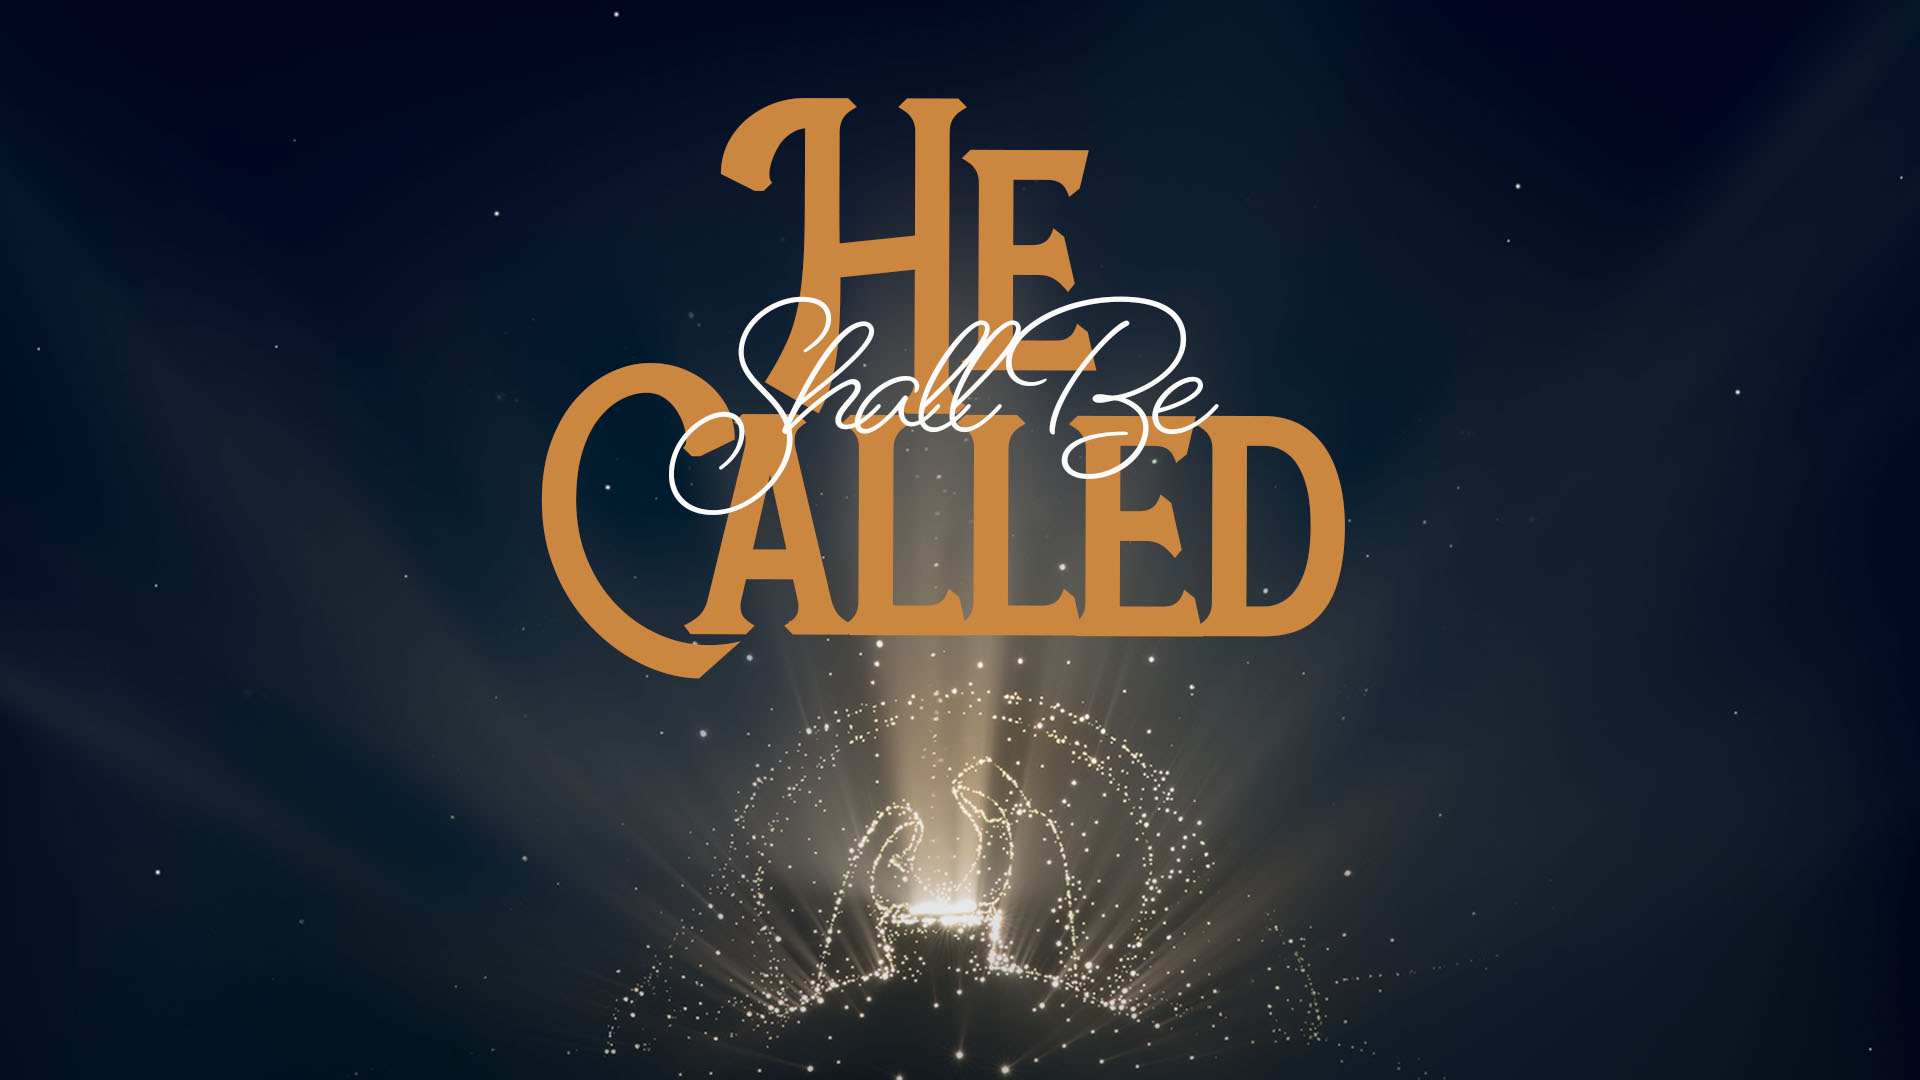 Christmas Services

Friday | December 23 @ 6:00pm
Saturday | December 24 @ 9:00am and 11:00am
 
